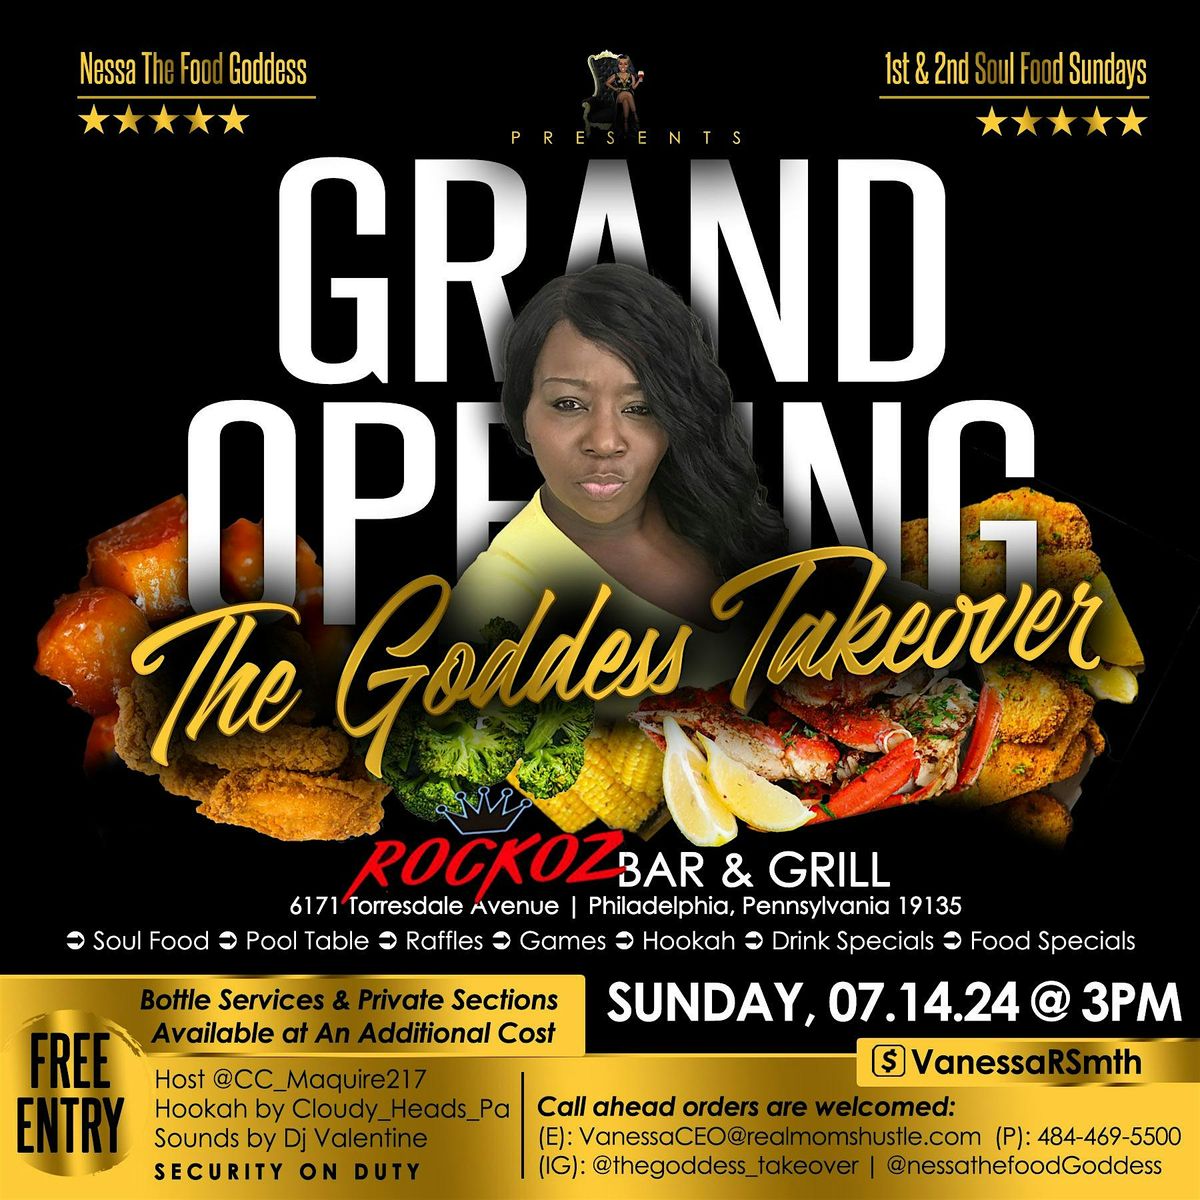 Nessa The Food Goddess presents The Goddess Take Over Grand Opening